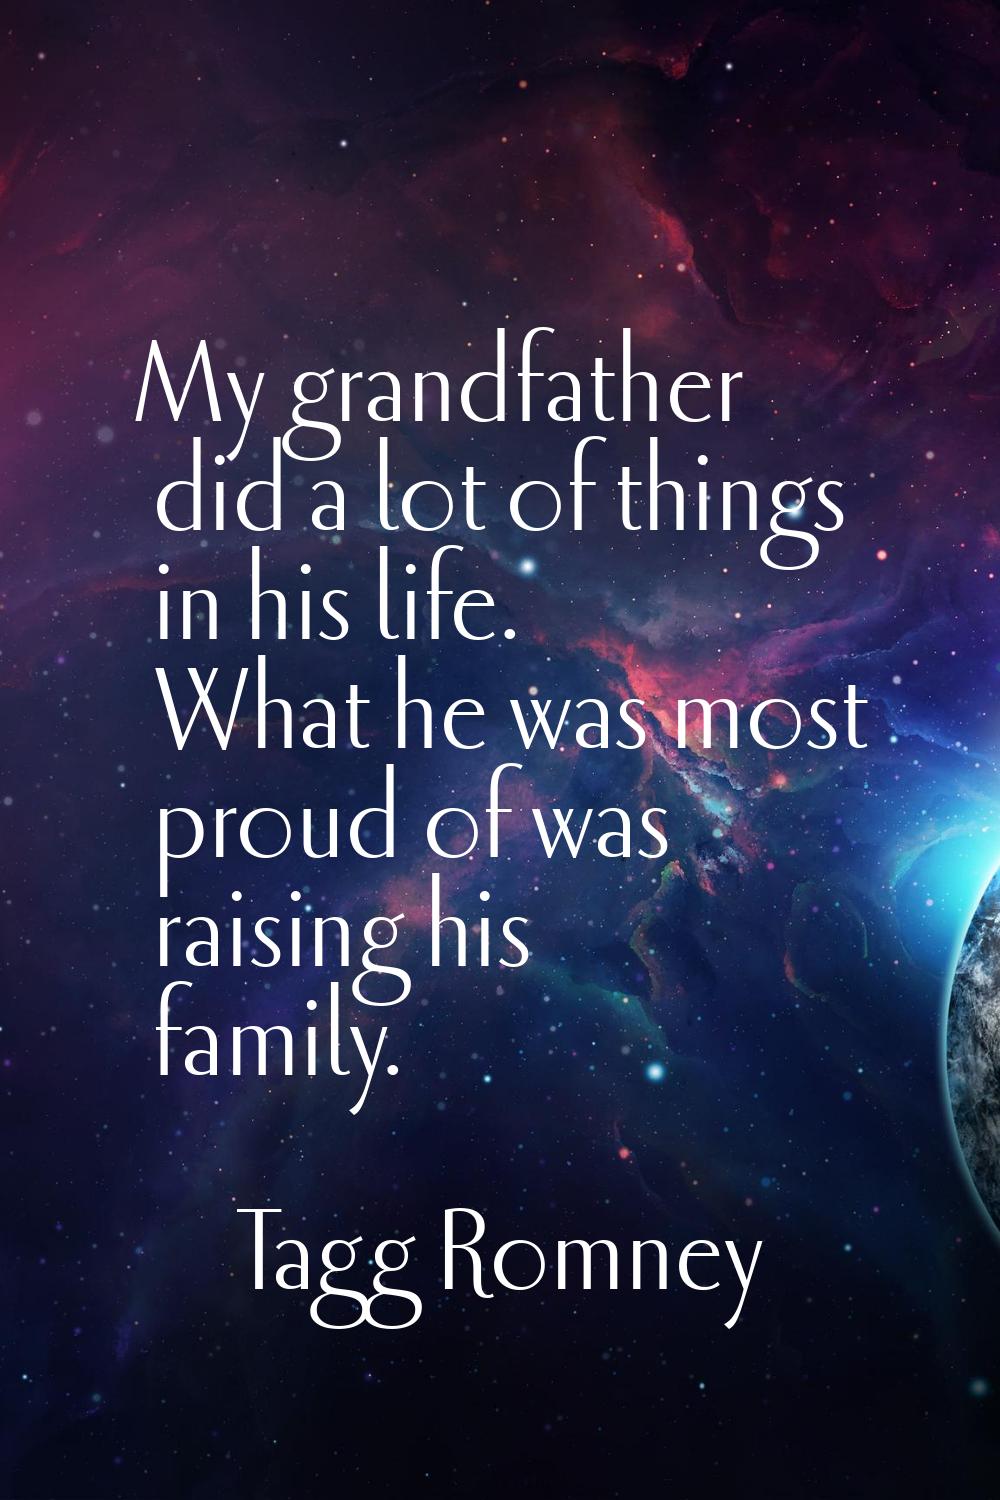 My grandfather did a lot of things in his life. What he was most proud of was raising his family.